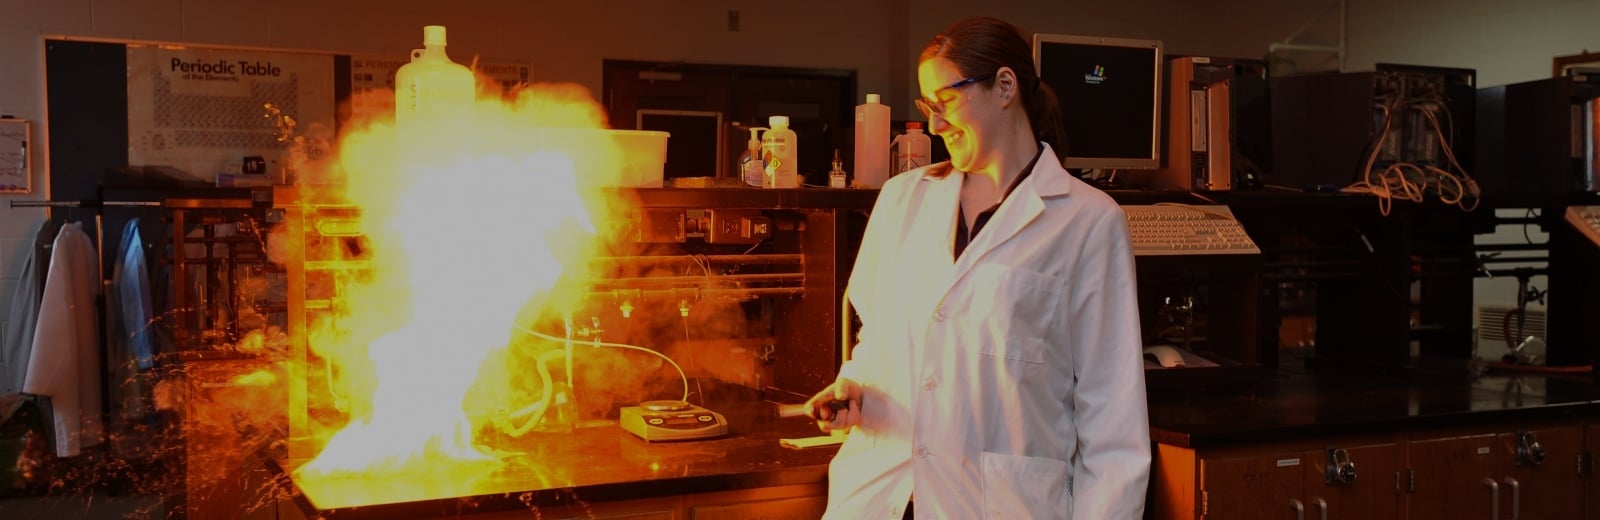 A controlled explosion in a chemistry lab